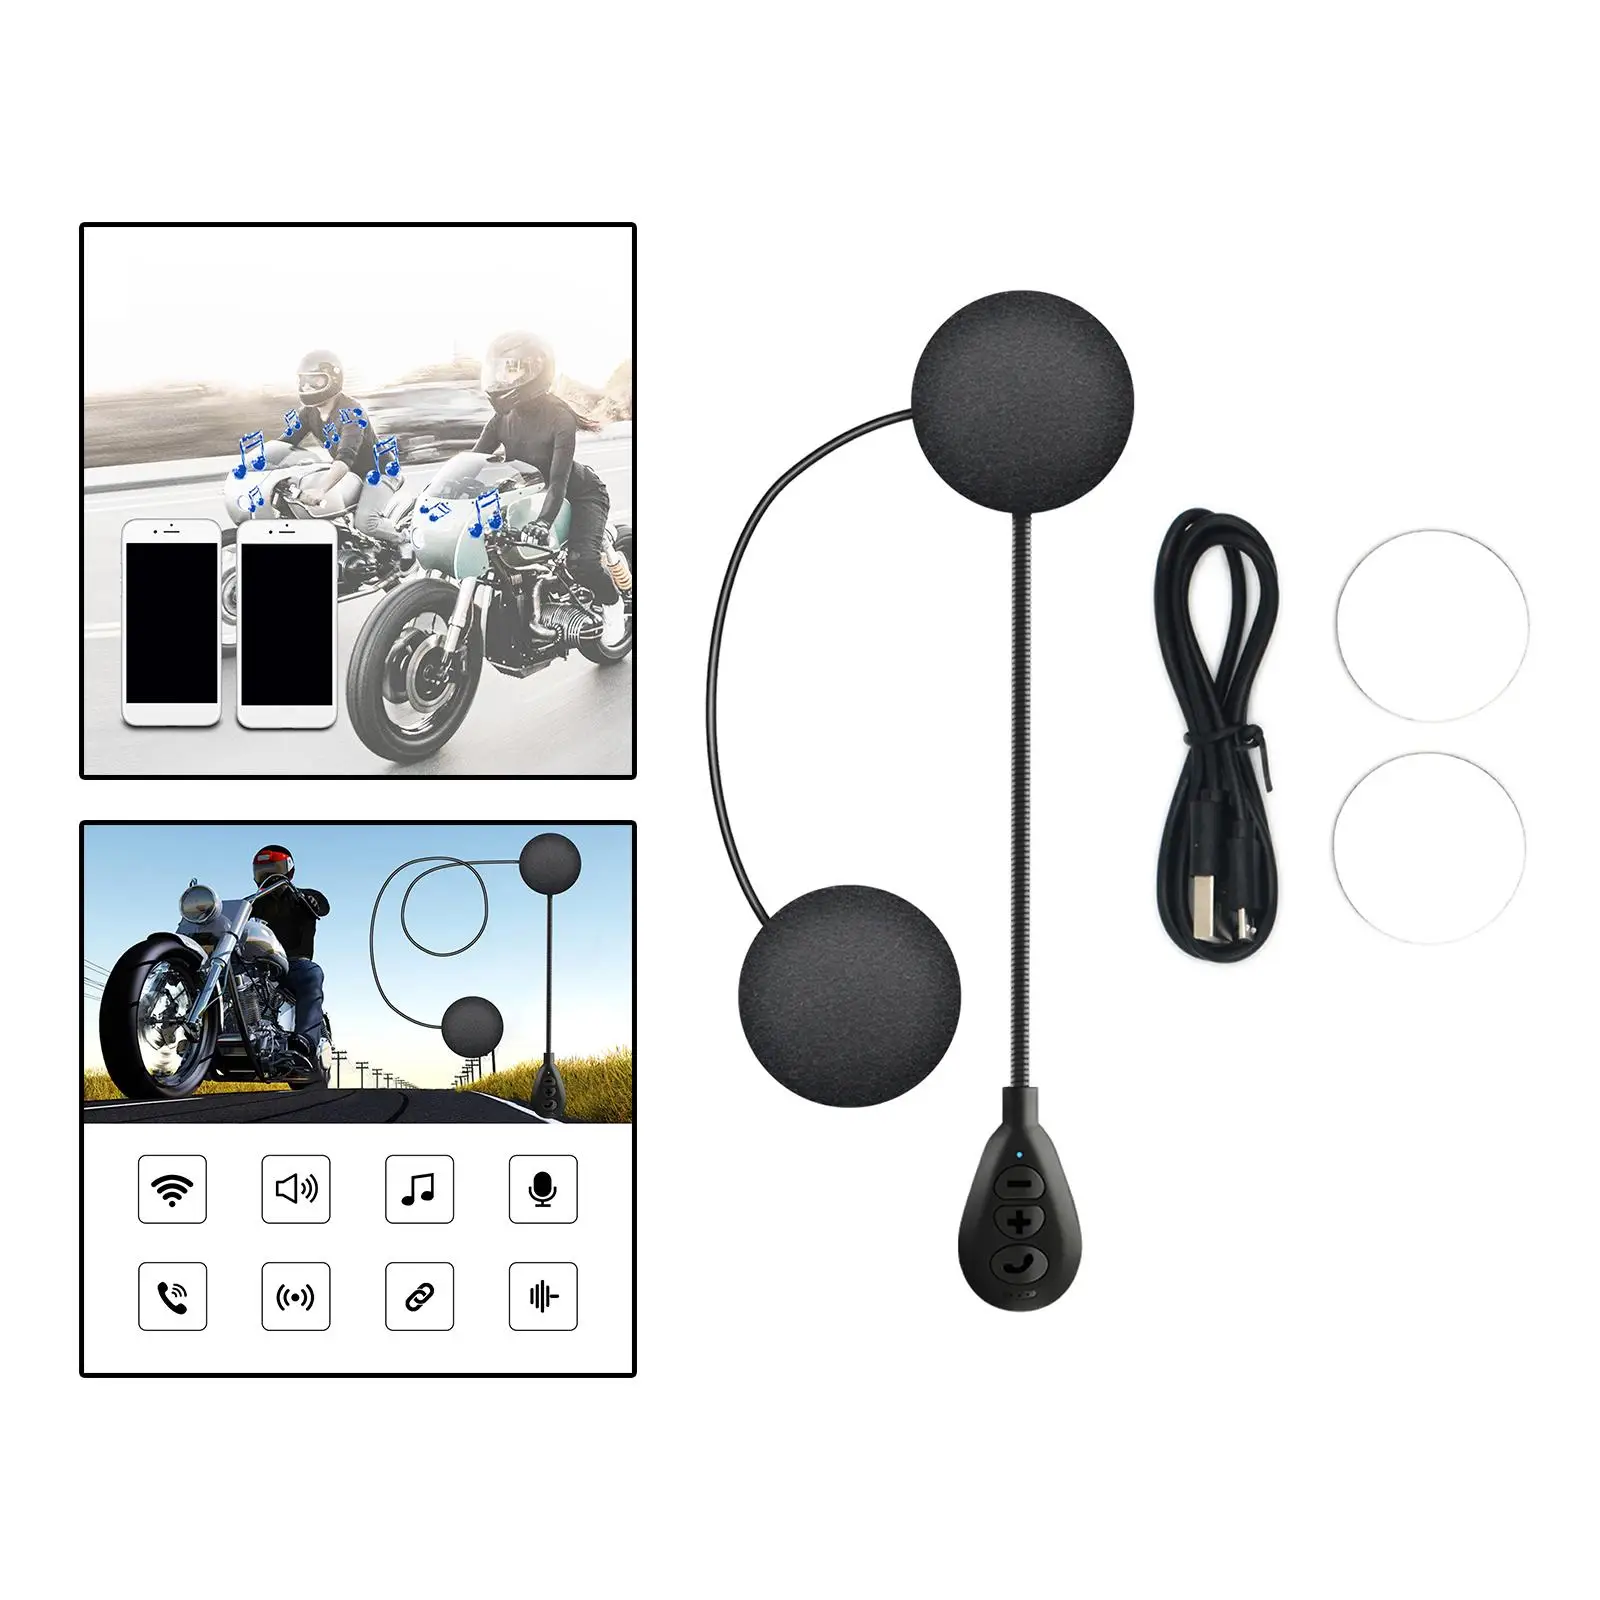 Motorcycle Bluetooth Helmet Headset Automatic Answering Stereo Volume Control Headphone for Express Delivery Outdoor Sports